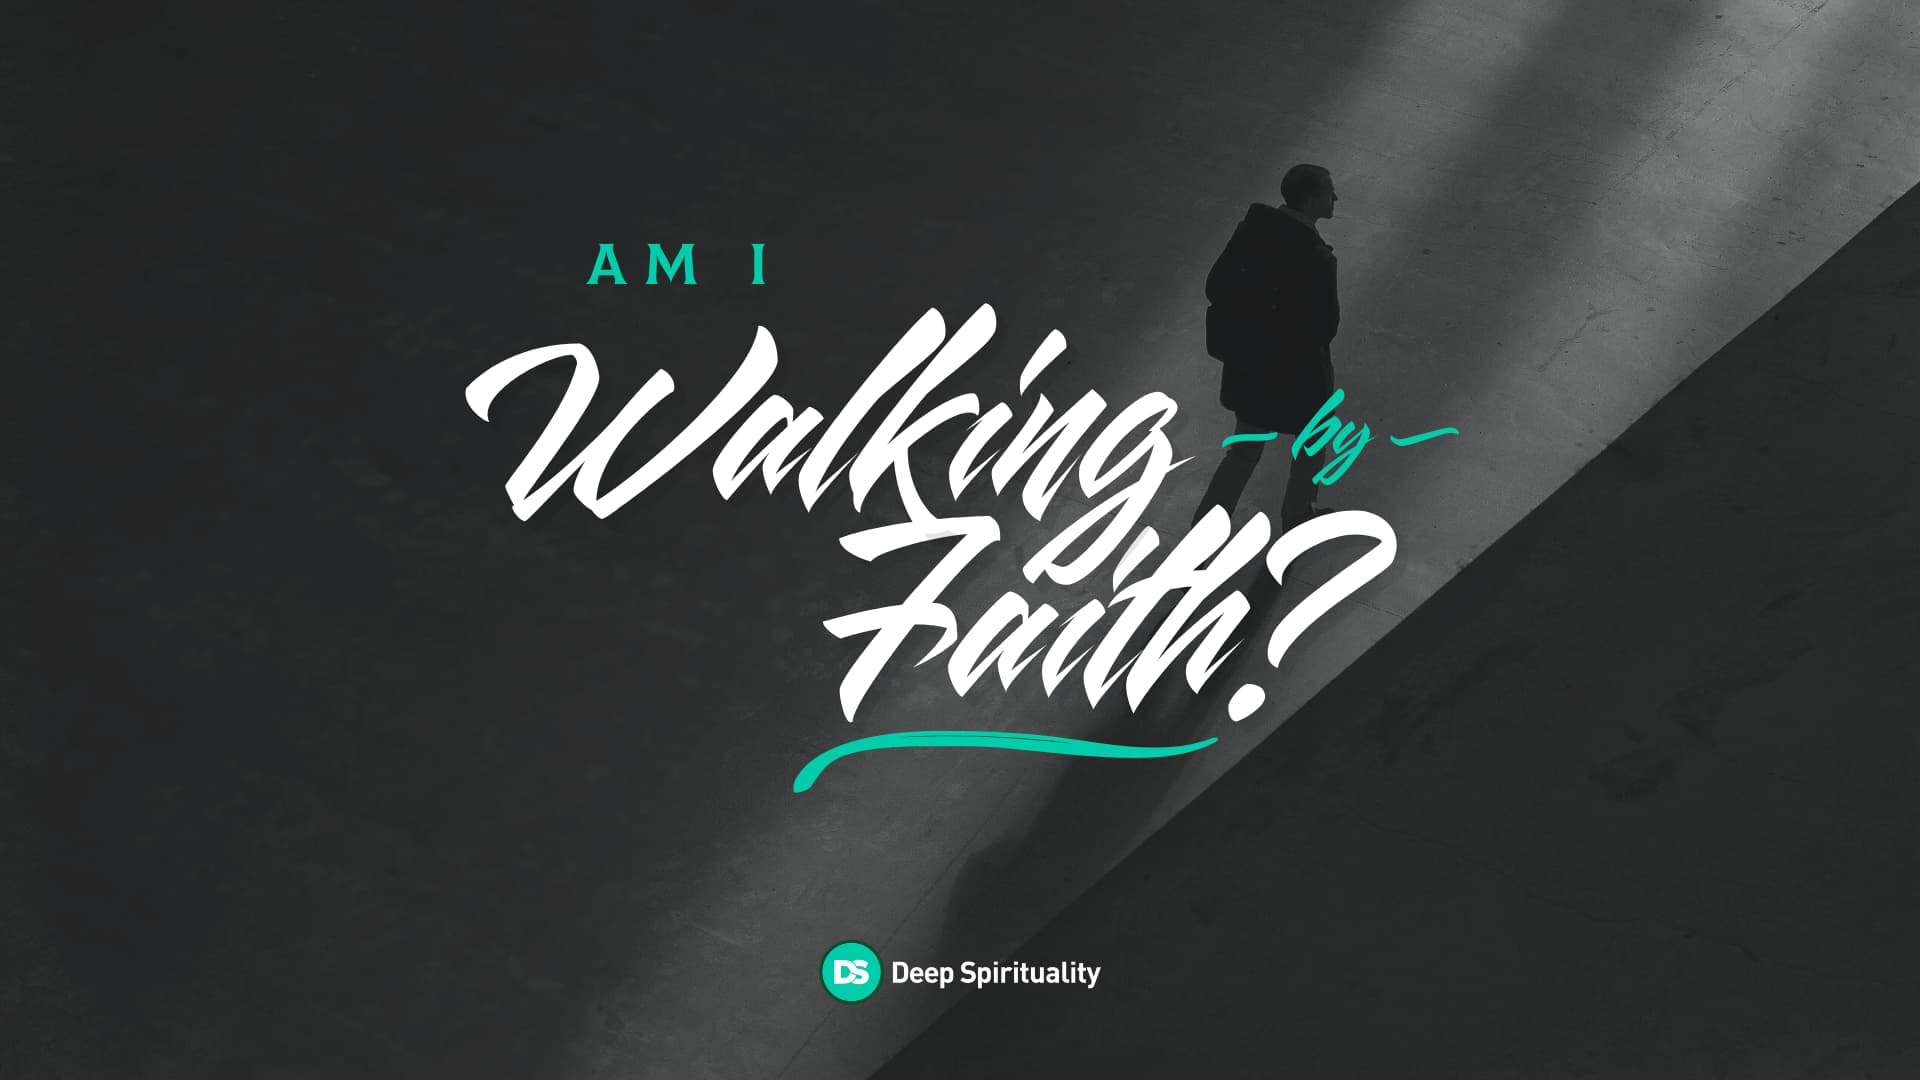 How Do I Know if I’m Walking by Faith? 116